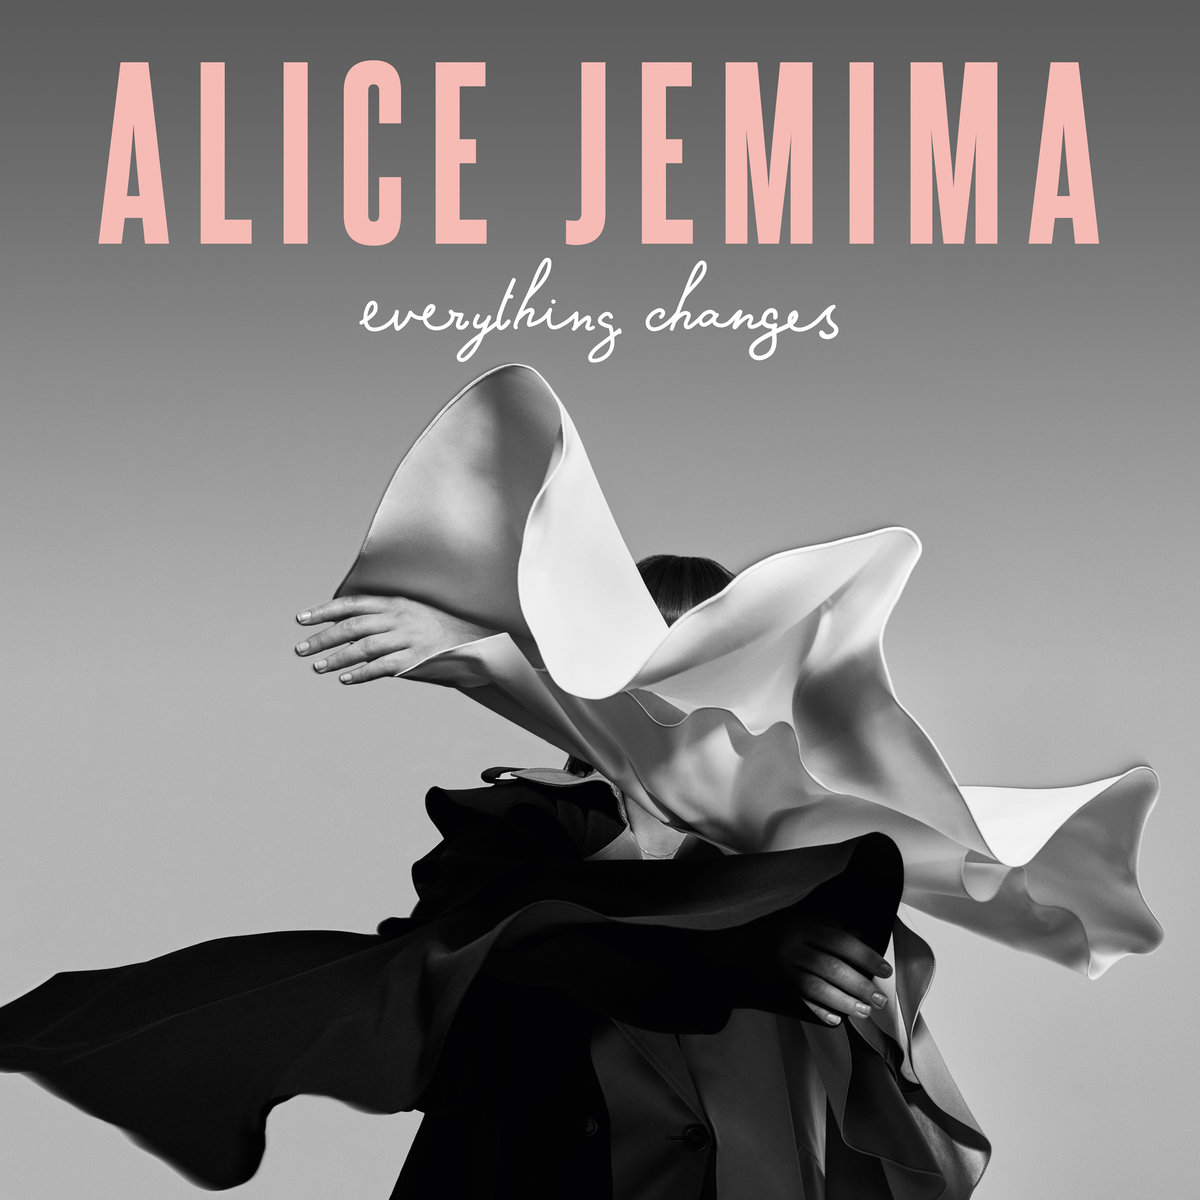 37. Everything Changes - Alice Jemima.I discovered her last year upon seeing her support Sophie Ellis-Bextor on her Song Diaries Tour & upon enjoying her set, I checked out her back catalogue. So glad I did. Best tracks:Dancing In LoveEverything's ChangingIcarusSomebody